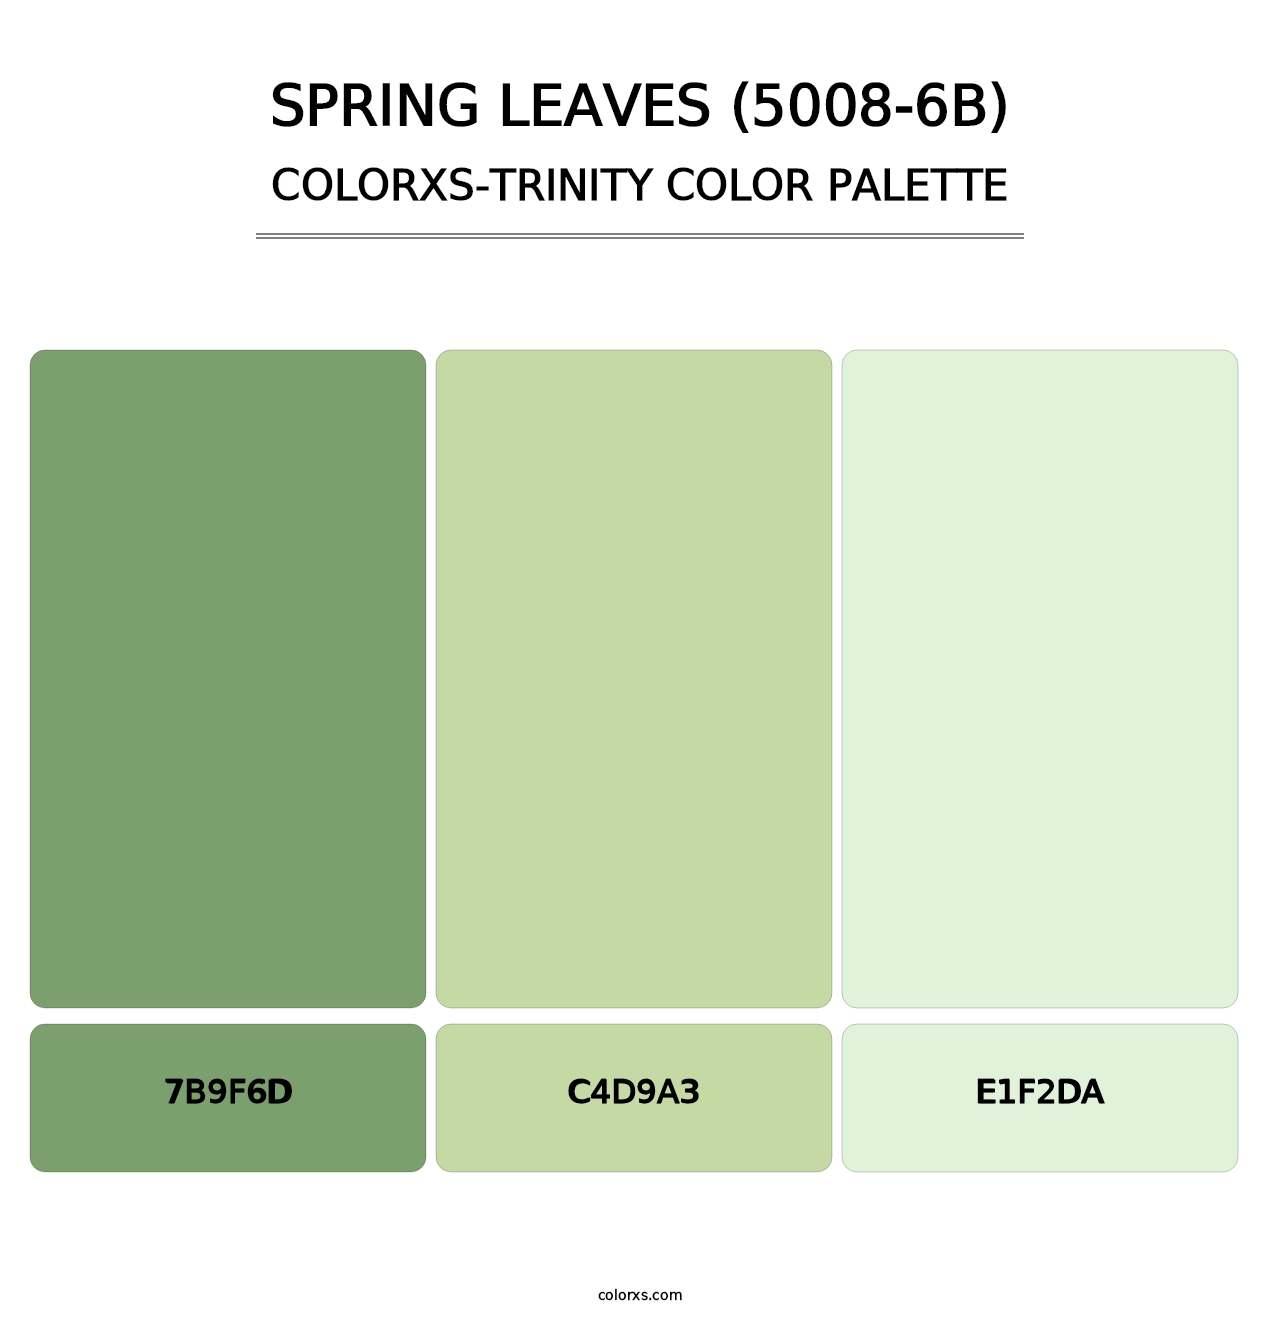 Spring Leaves (5008-6B) - Colorxs Trinity Palette